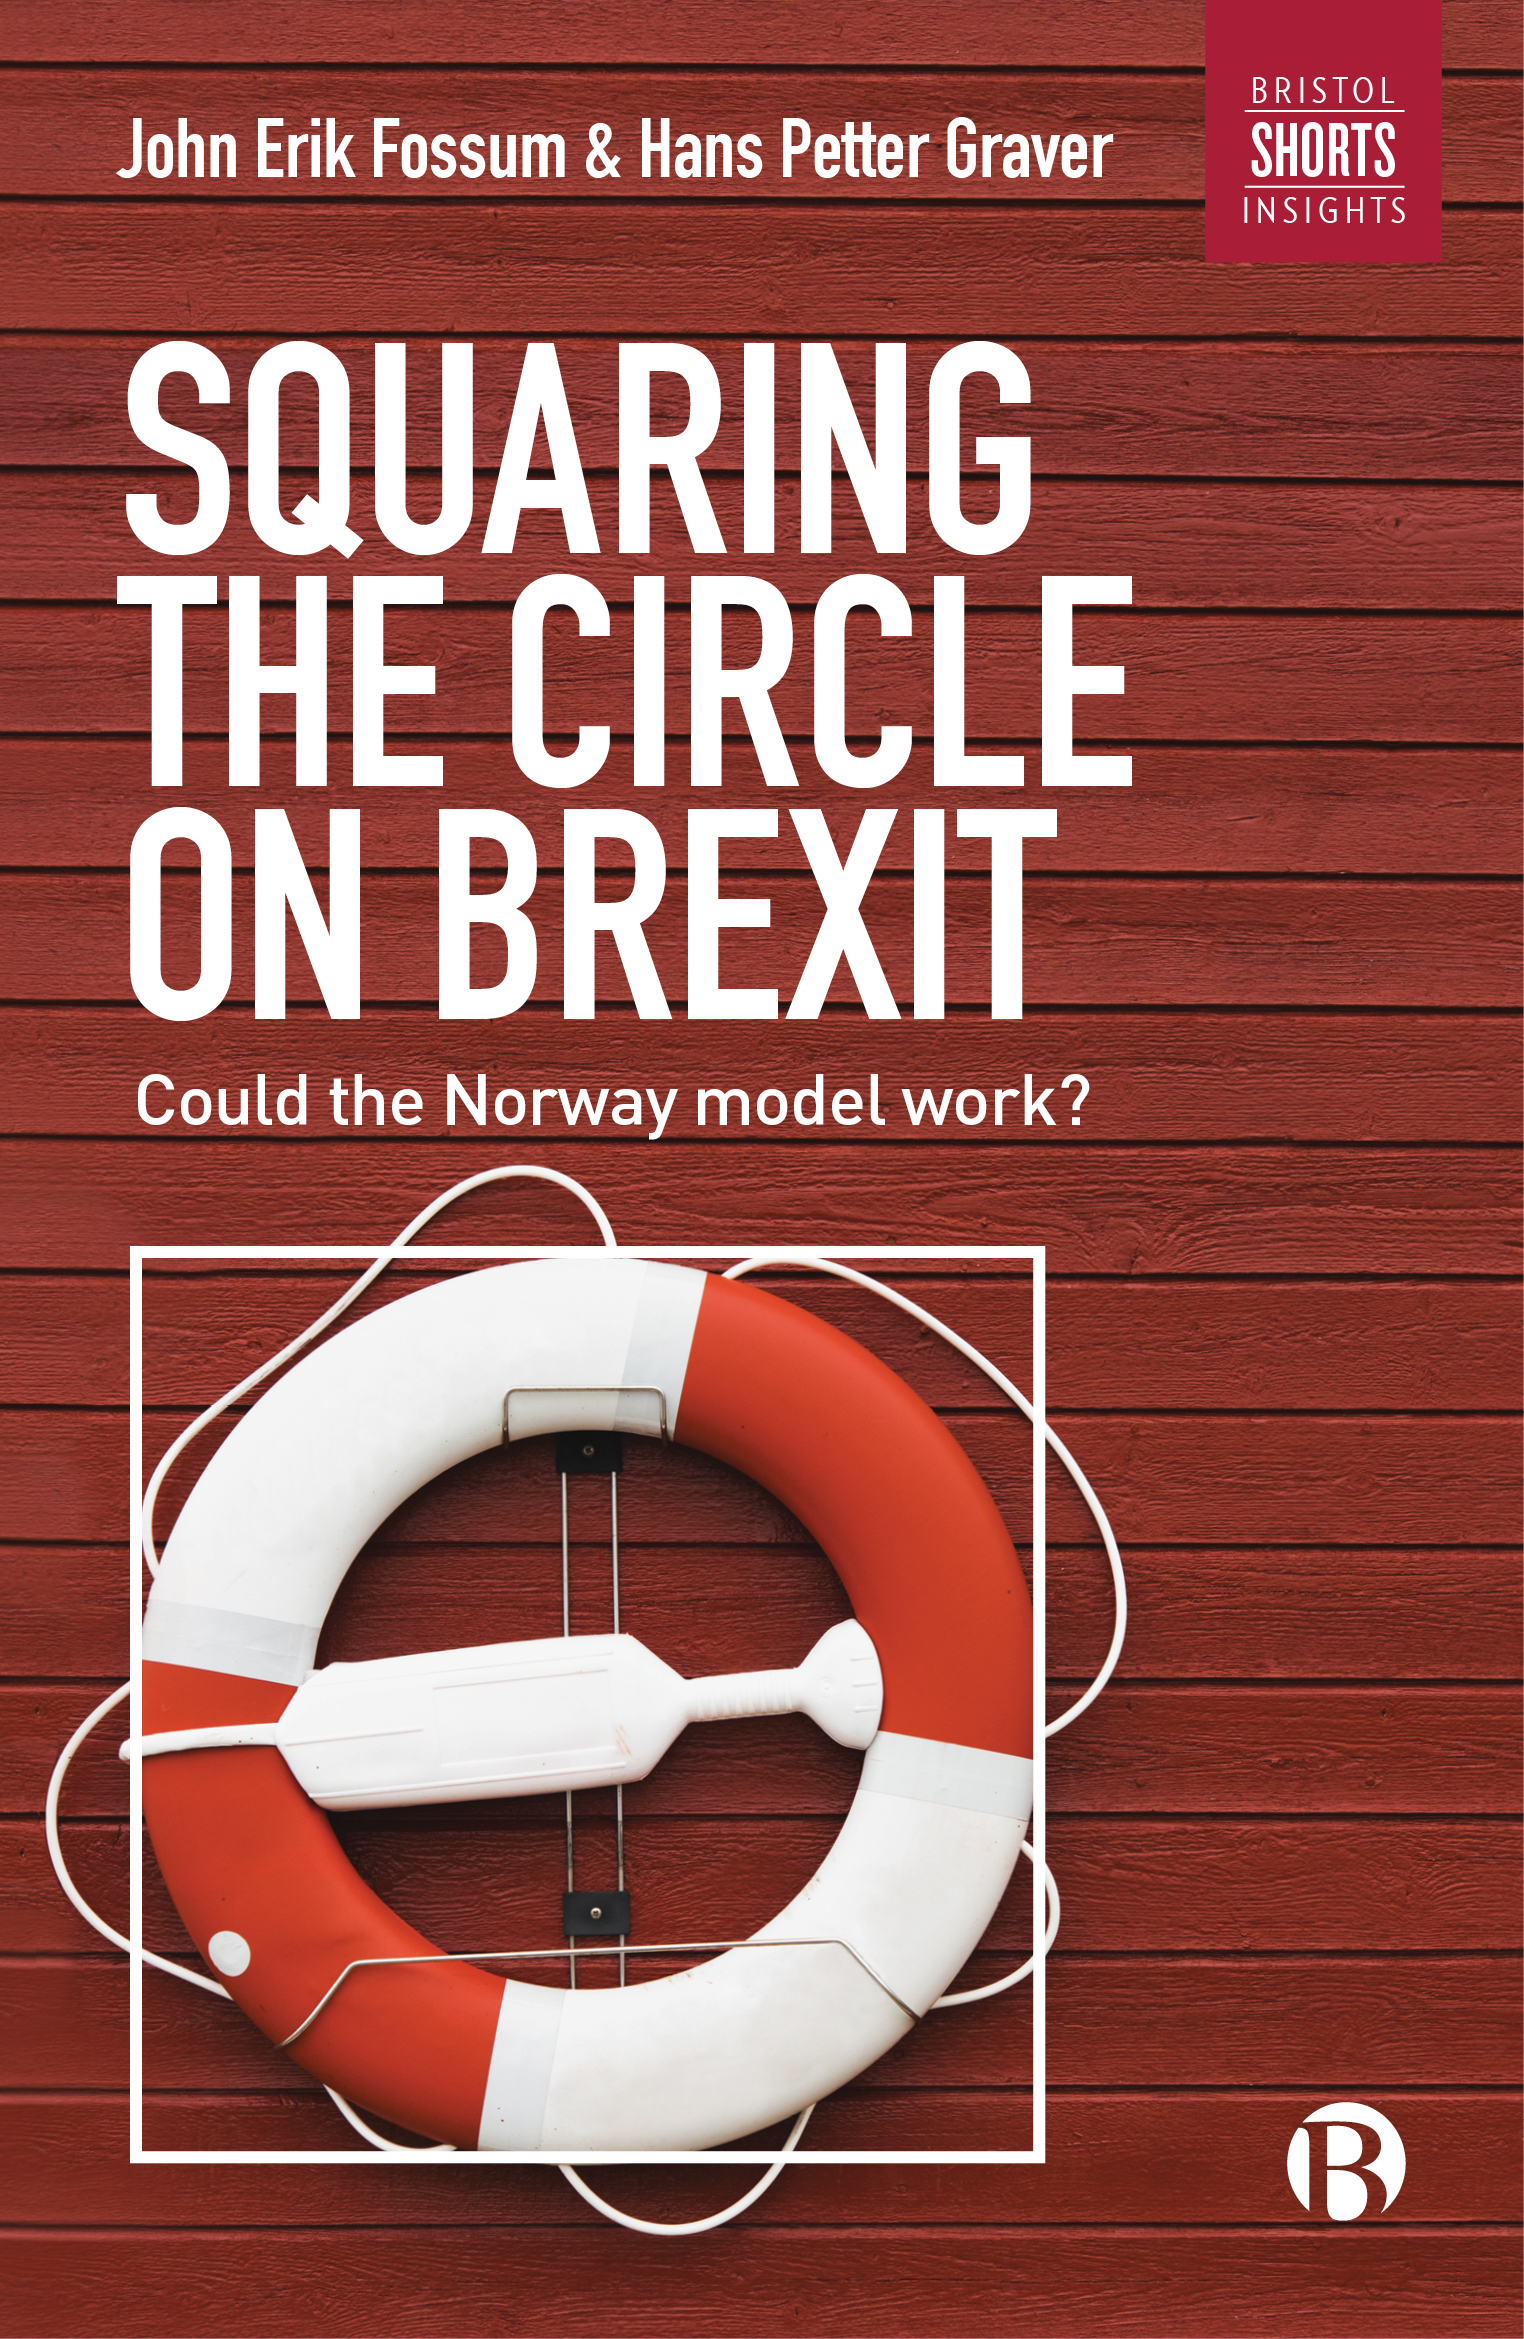 Great Coverage for Squaring the circle on Brexit